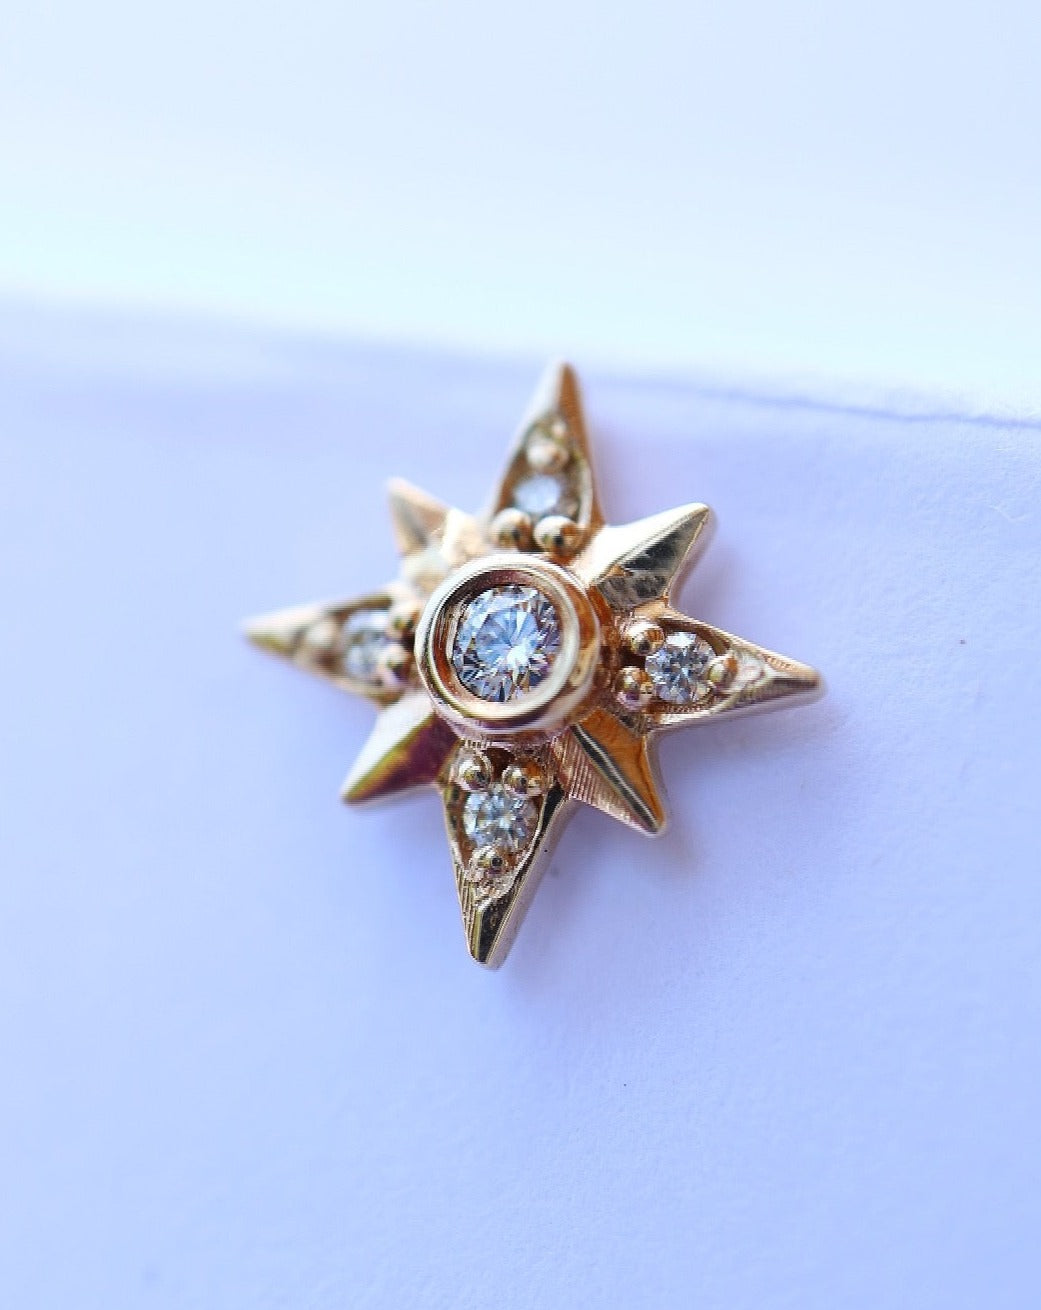 14kt gold and diamonds northern star piercing stud from My Peach Jewels